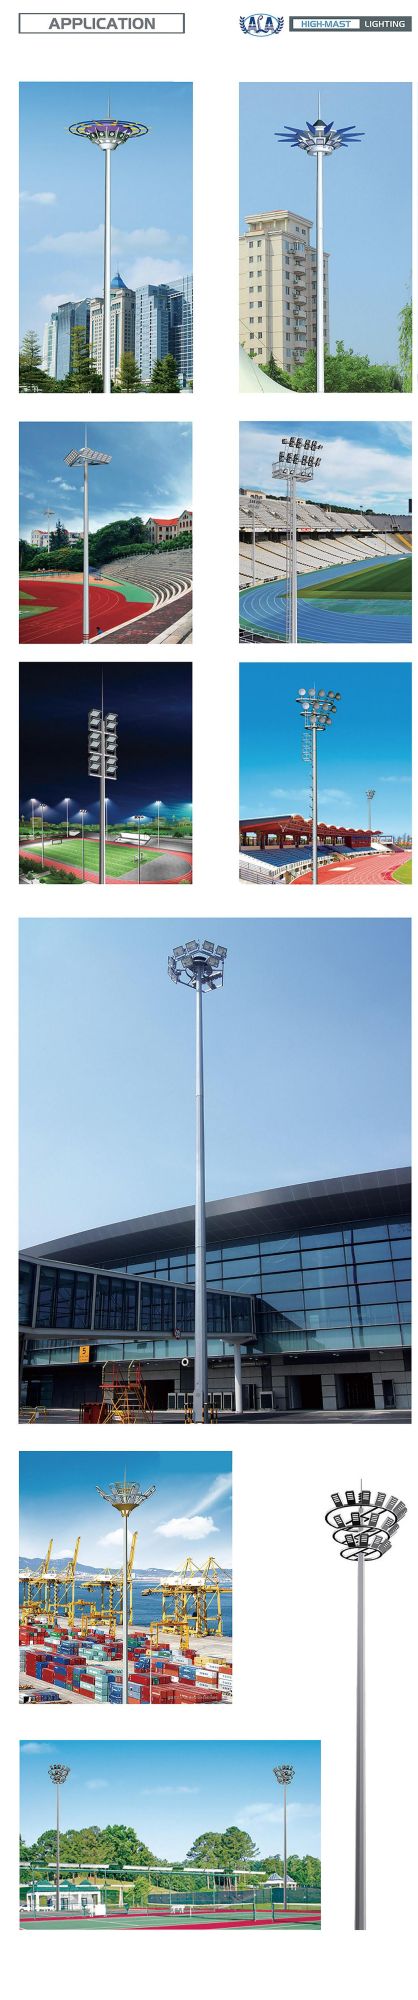 Ala 200W New LED High Mast Light with Raising and Lowering Device